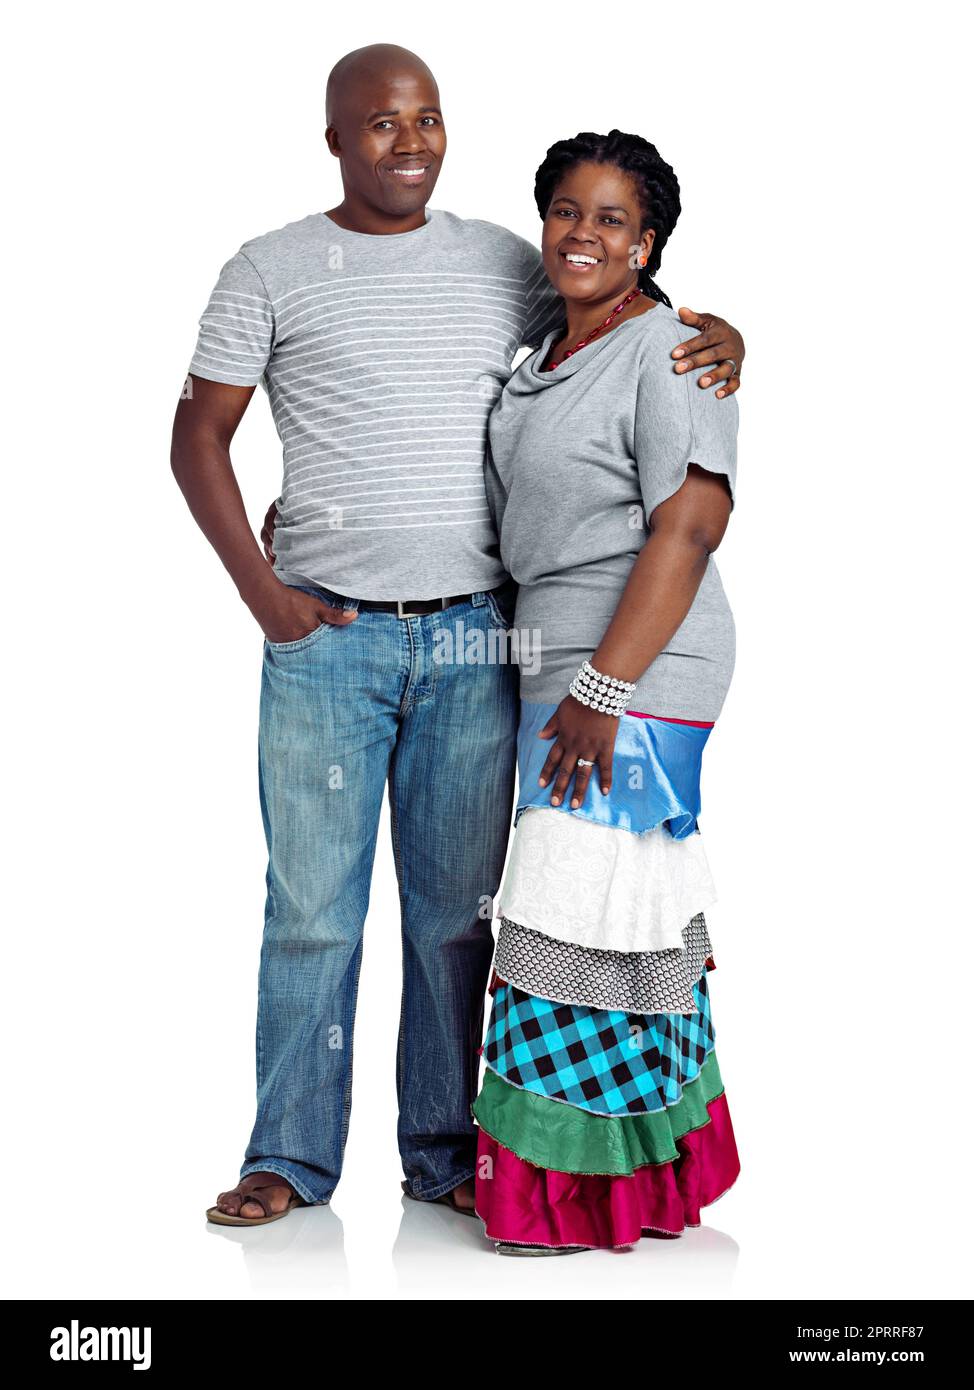 Married to my best friend. Studio shot of a happy black couple standing against a white background. Stock Photo